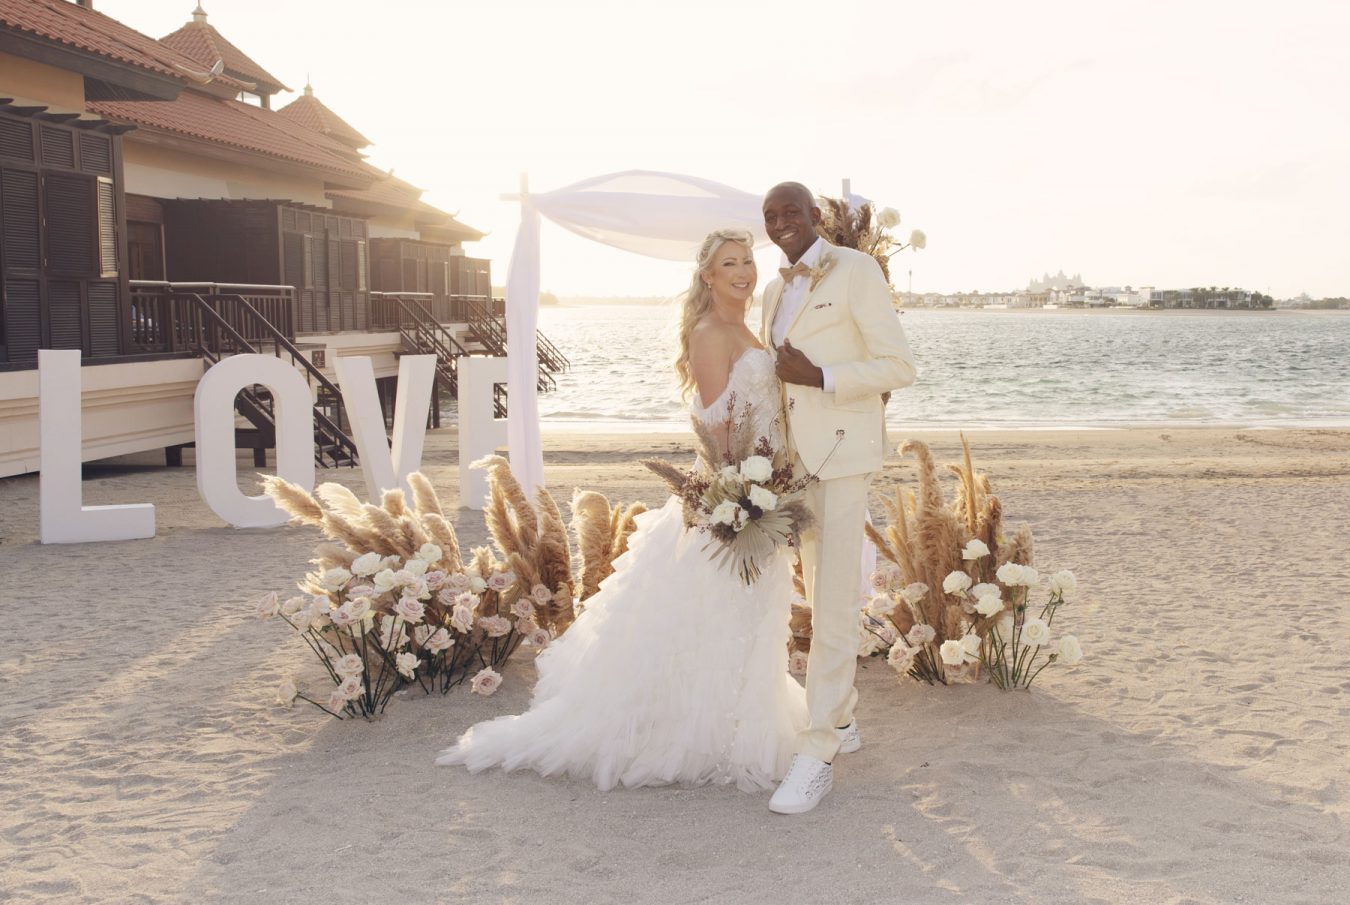 A beautiful wedding couple at the beach